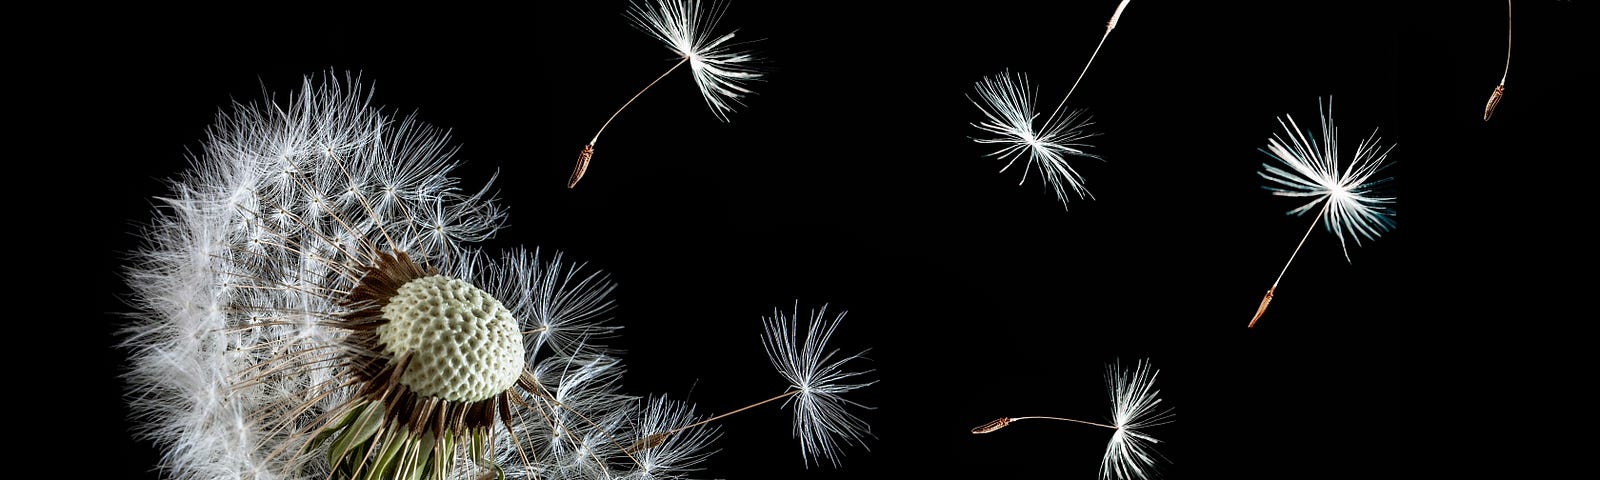 seeds blowing off of a dandelion, black background